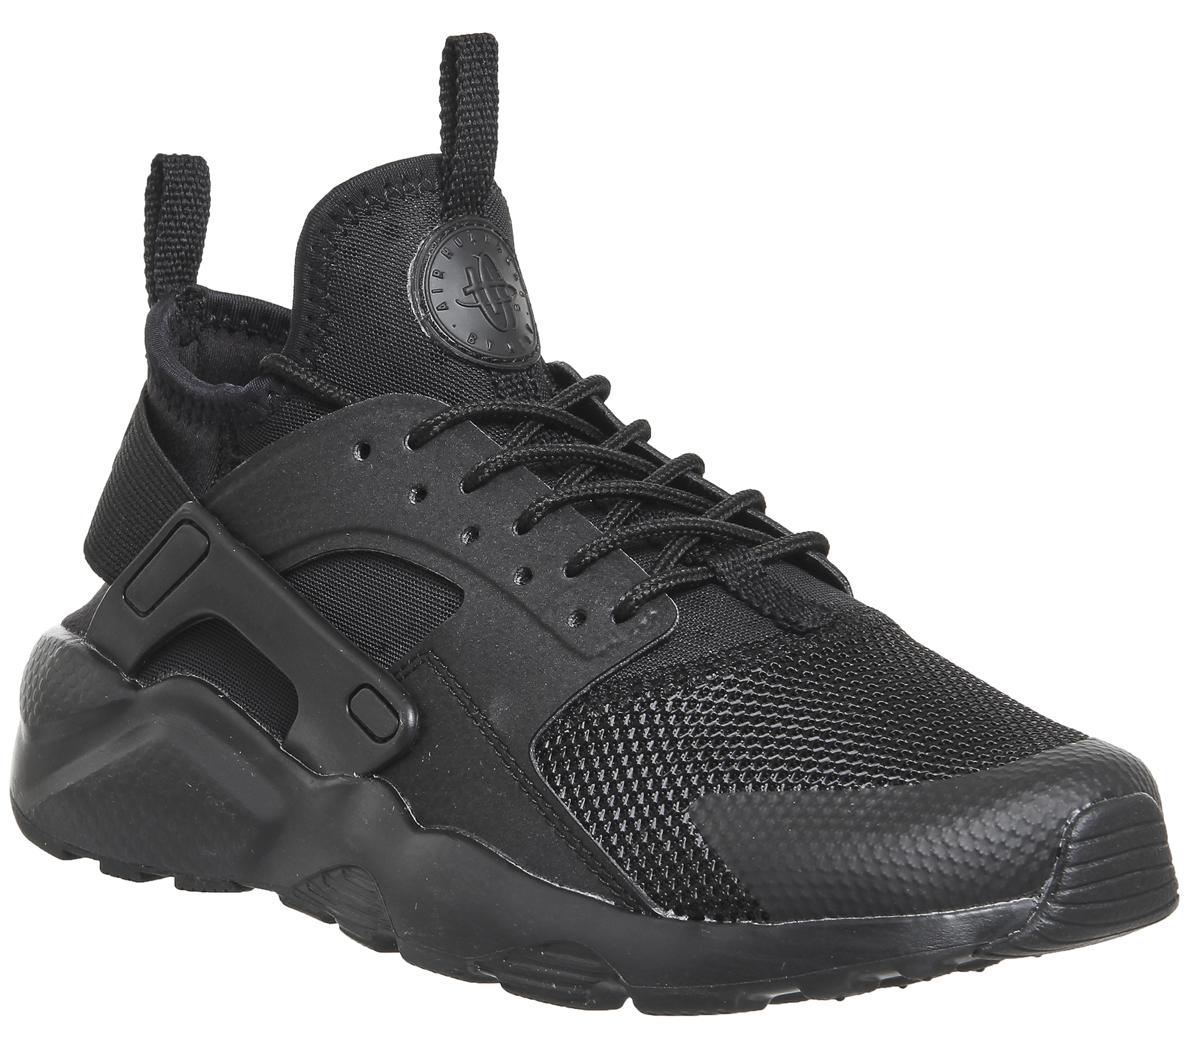 huarache 50 style coupon code for 23beb 